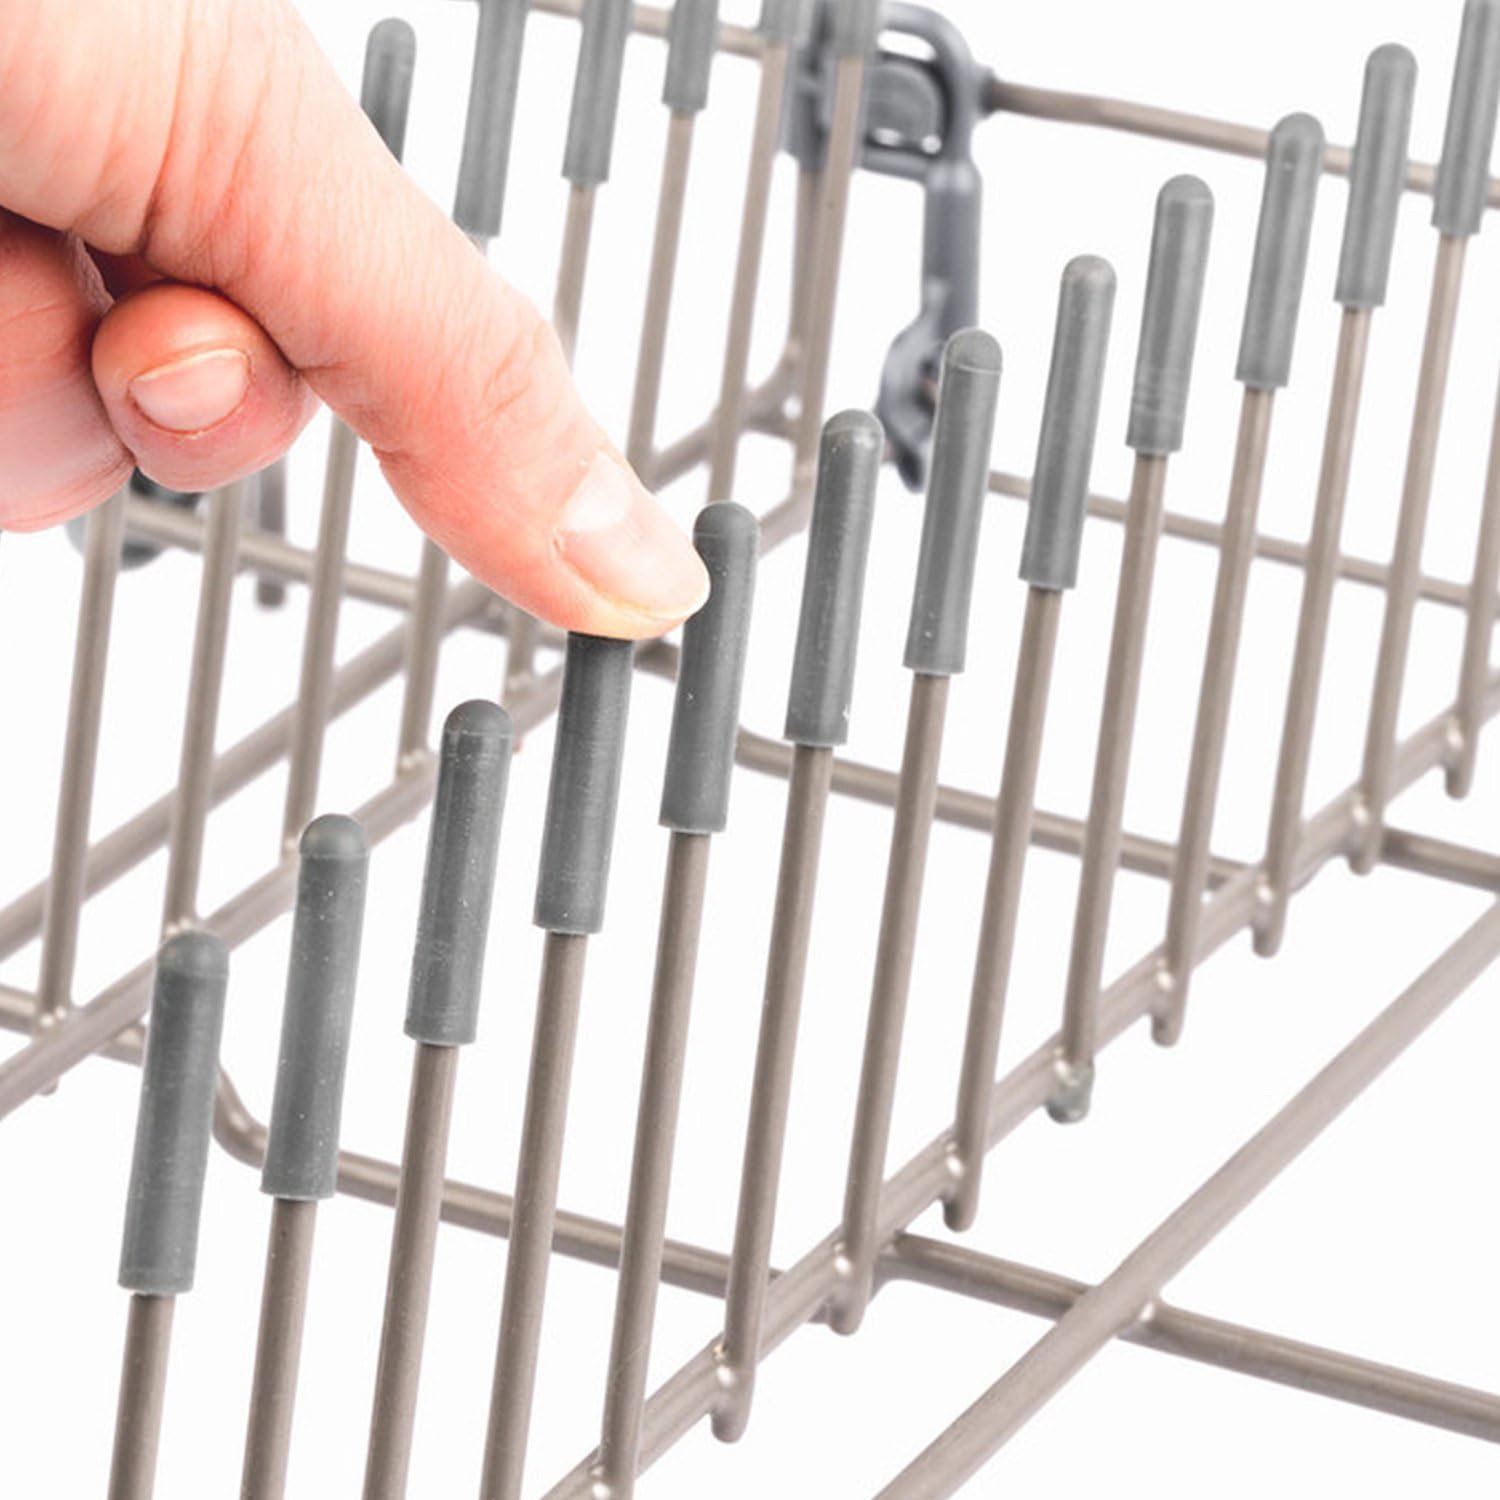 The Original Smith’s Dishwasher Rack Caps (Set of 100, Colour: Grey, Material: PVC) - Dishwasher Protection Prongs | Fits All Dishwasher Models | Made in The EU | 1 Year Money Back Guarantee! - Amazing Gadgets Outlet